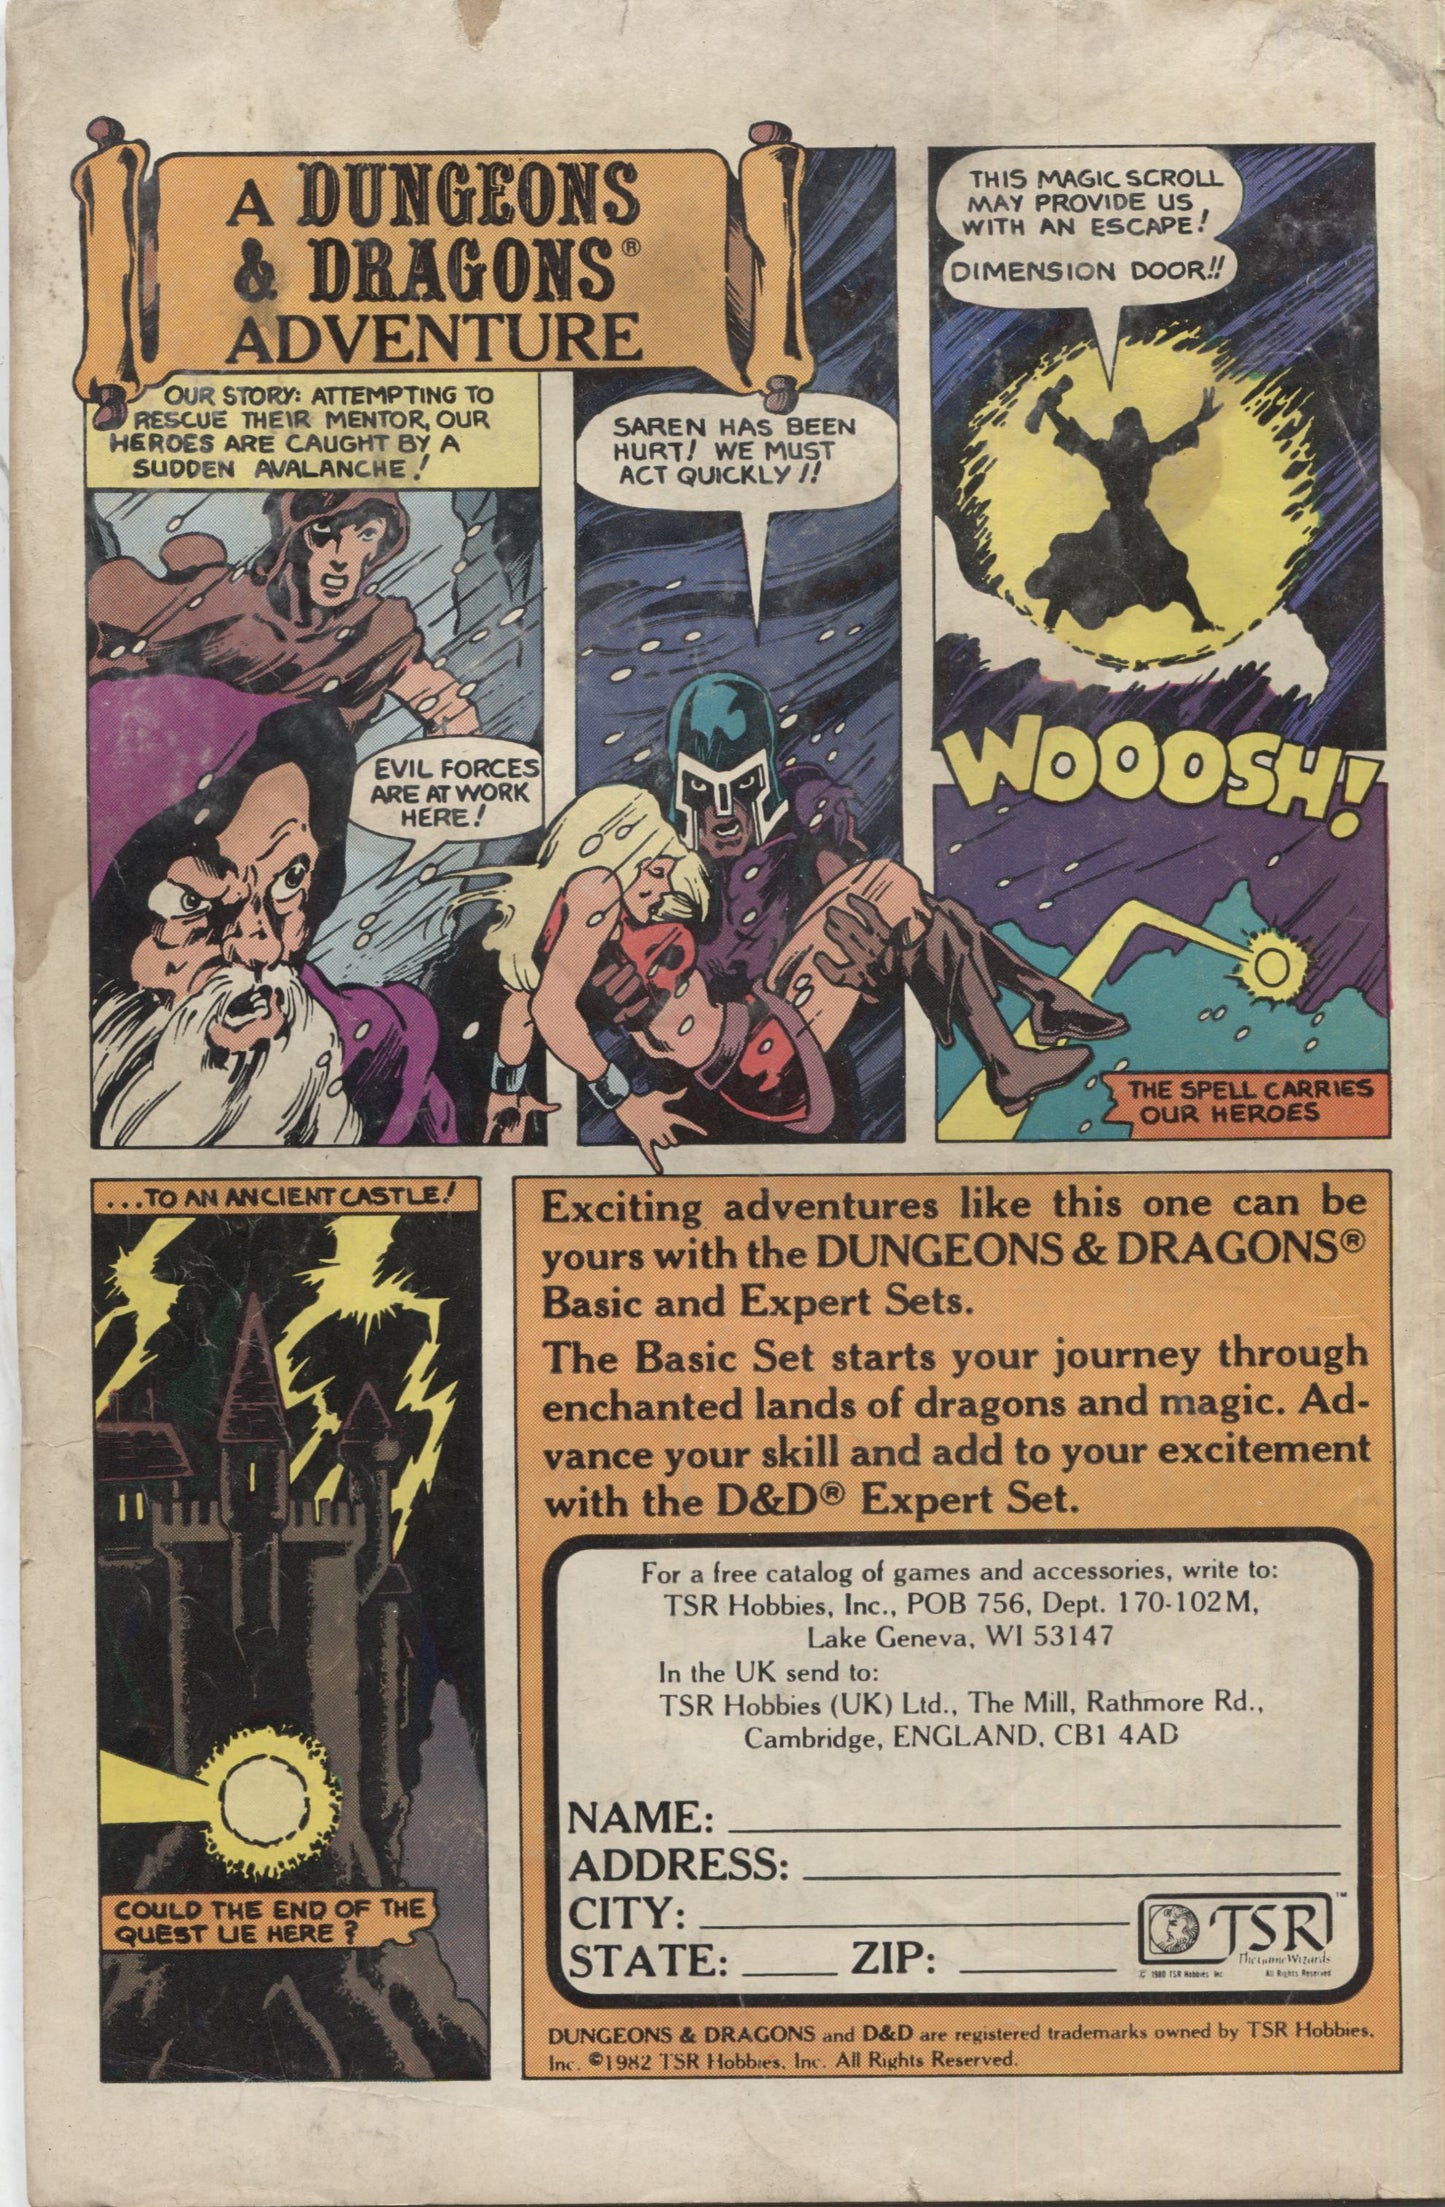 The House of Mystery No. 308, DC Comics, September 1982